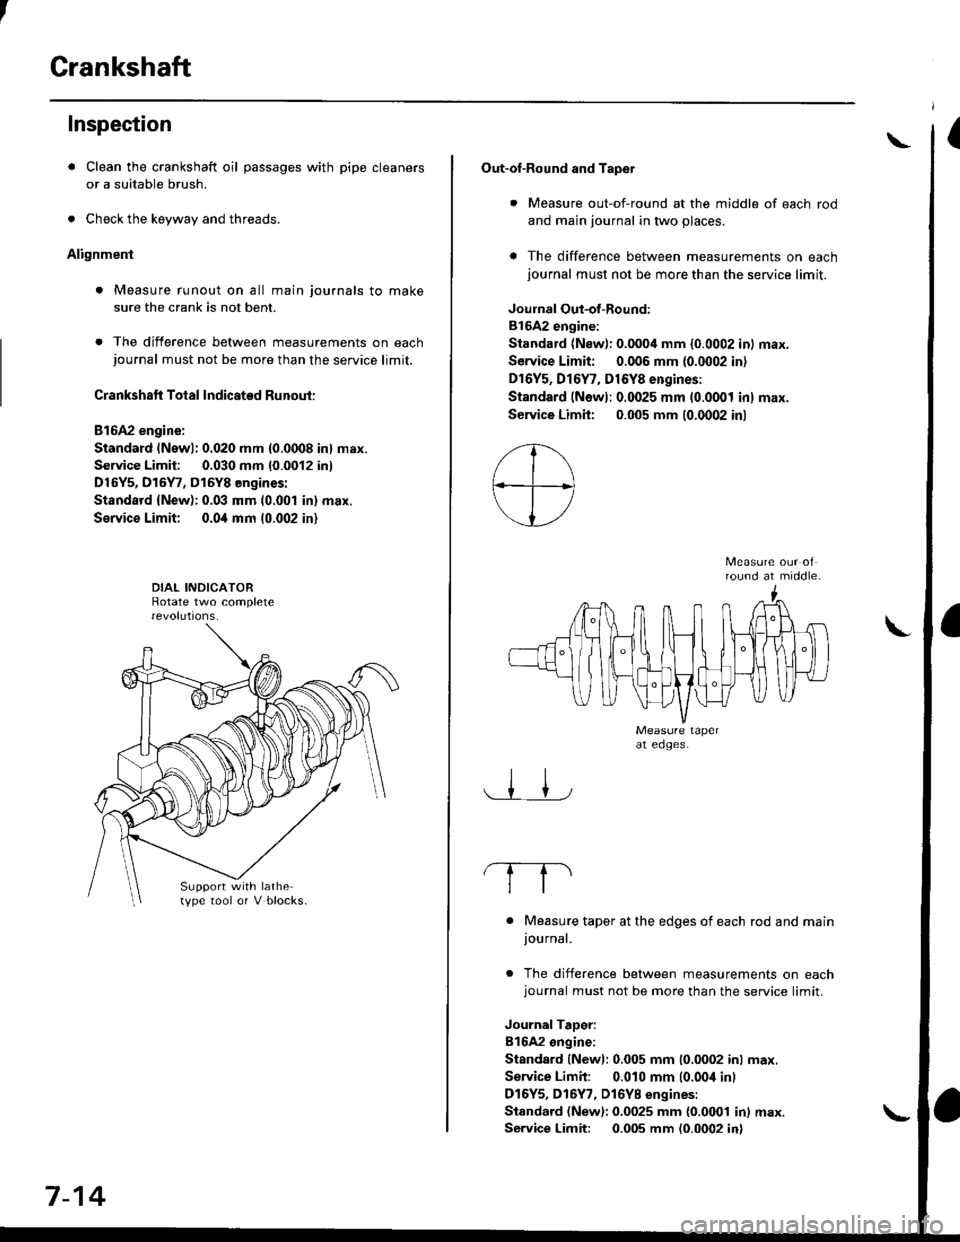 HONDA CIVIC 1999 6.G Owners Guide Crankshaft
Inspection
. Clean the crankshaft oil passages with pipe cleaners
or a suitable brush.
. Check the keyway and threads.
Alignment
. Measure runout on all main journals to make
sure the crank